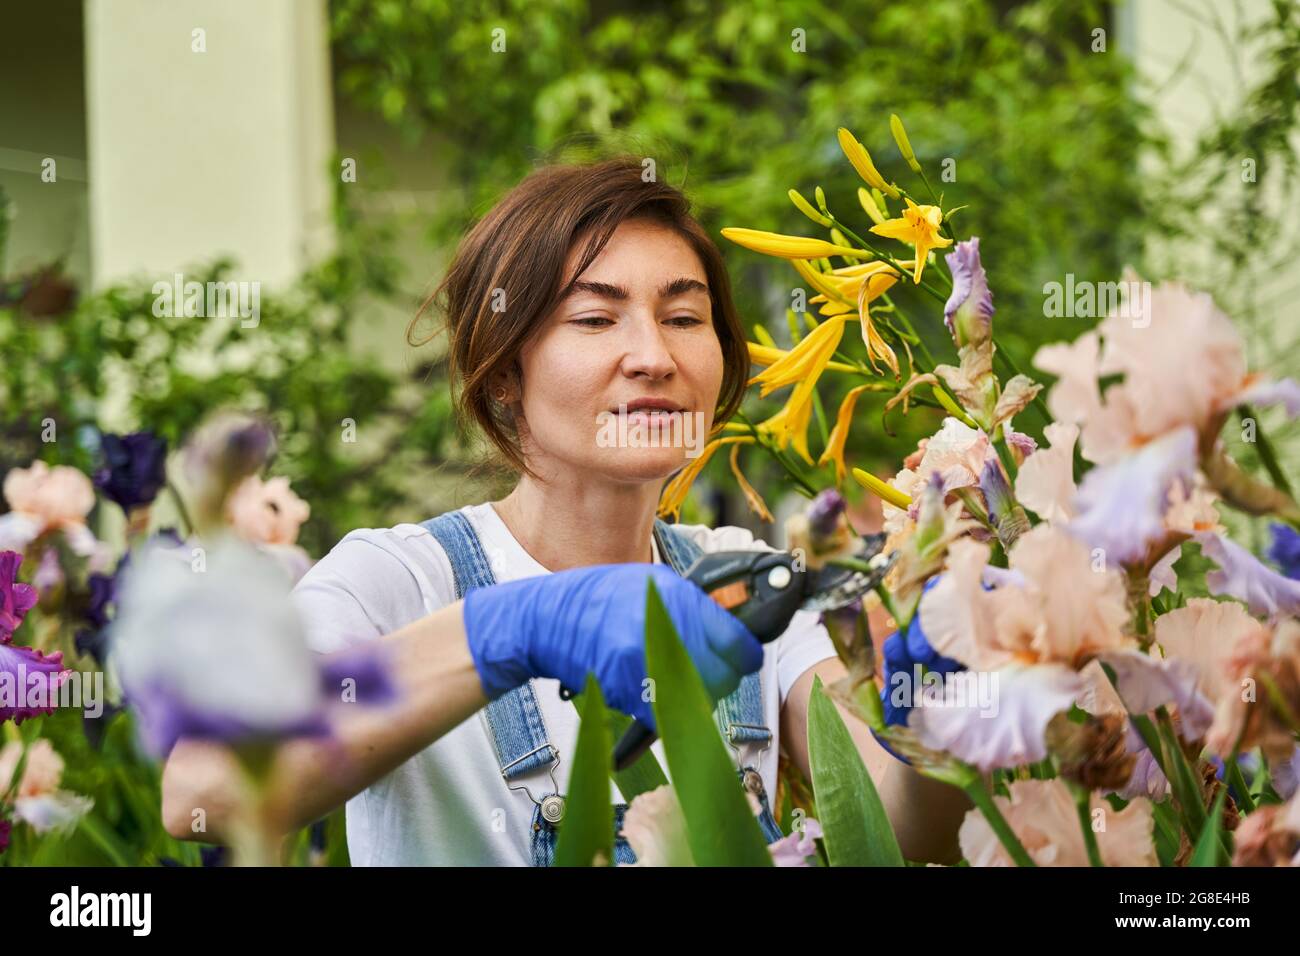 Gardener in gloves cutting flower with pruning shears Stock Photo